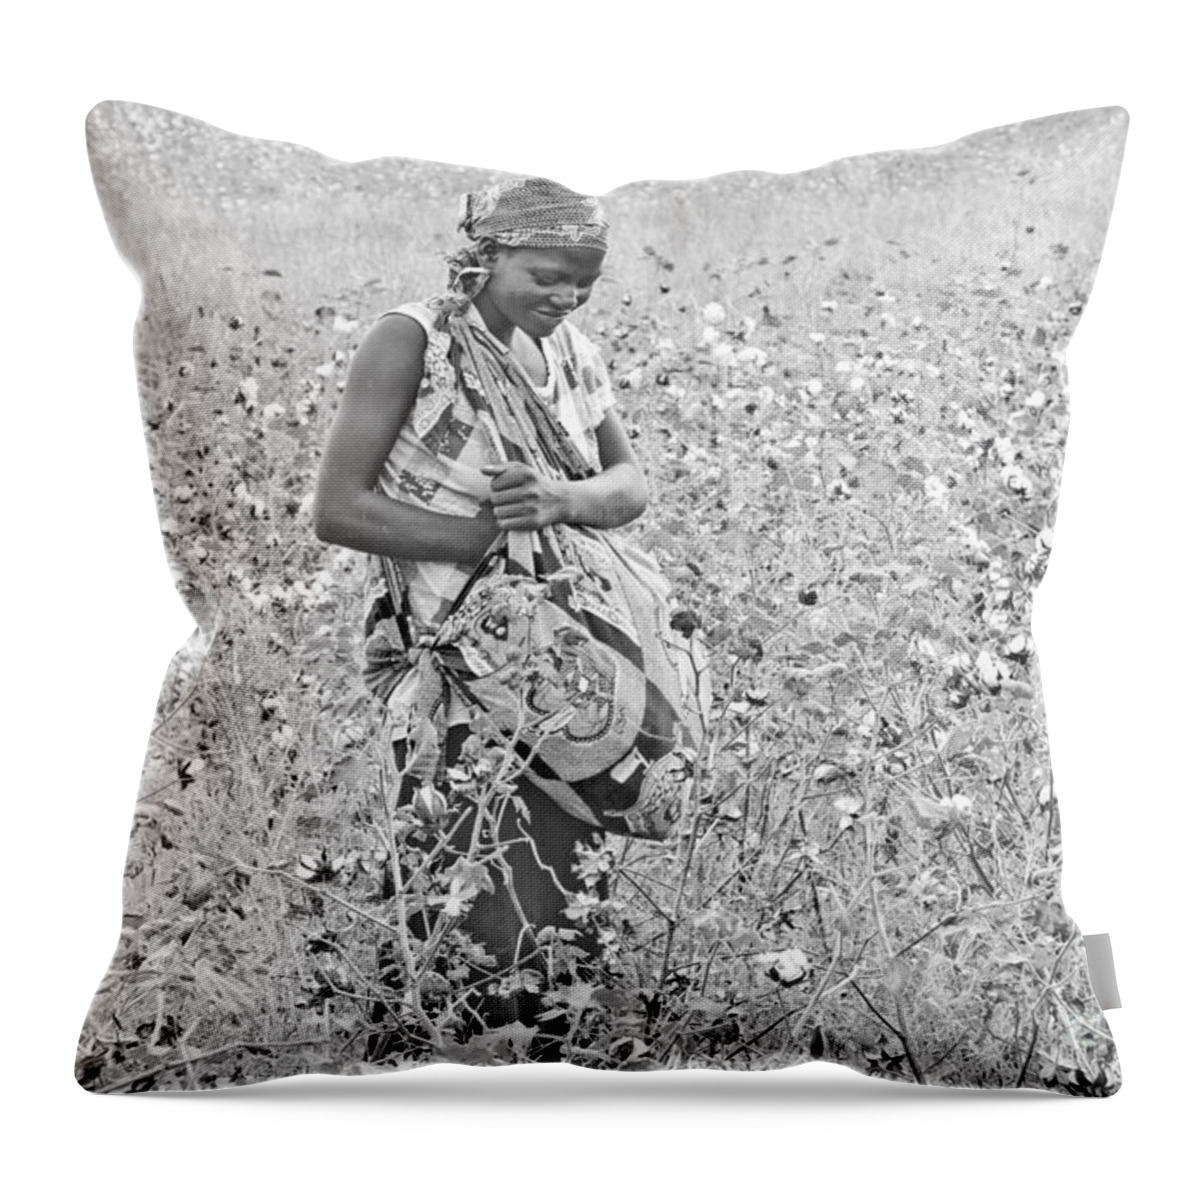 People Throw Pillow featuring the photograph Cotton Picker by Pravine Chester